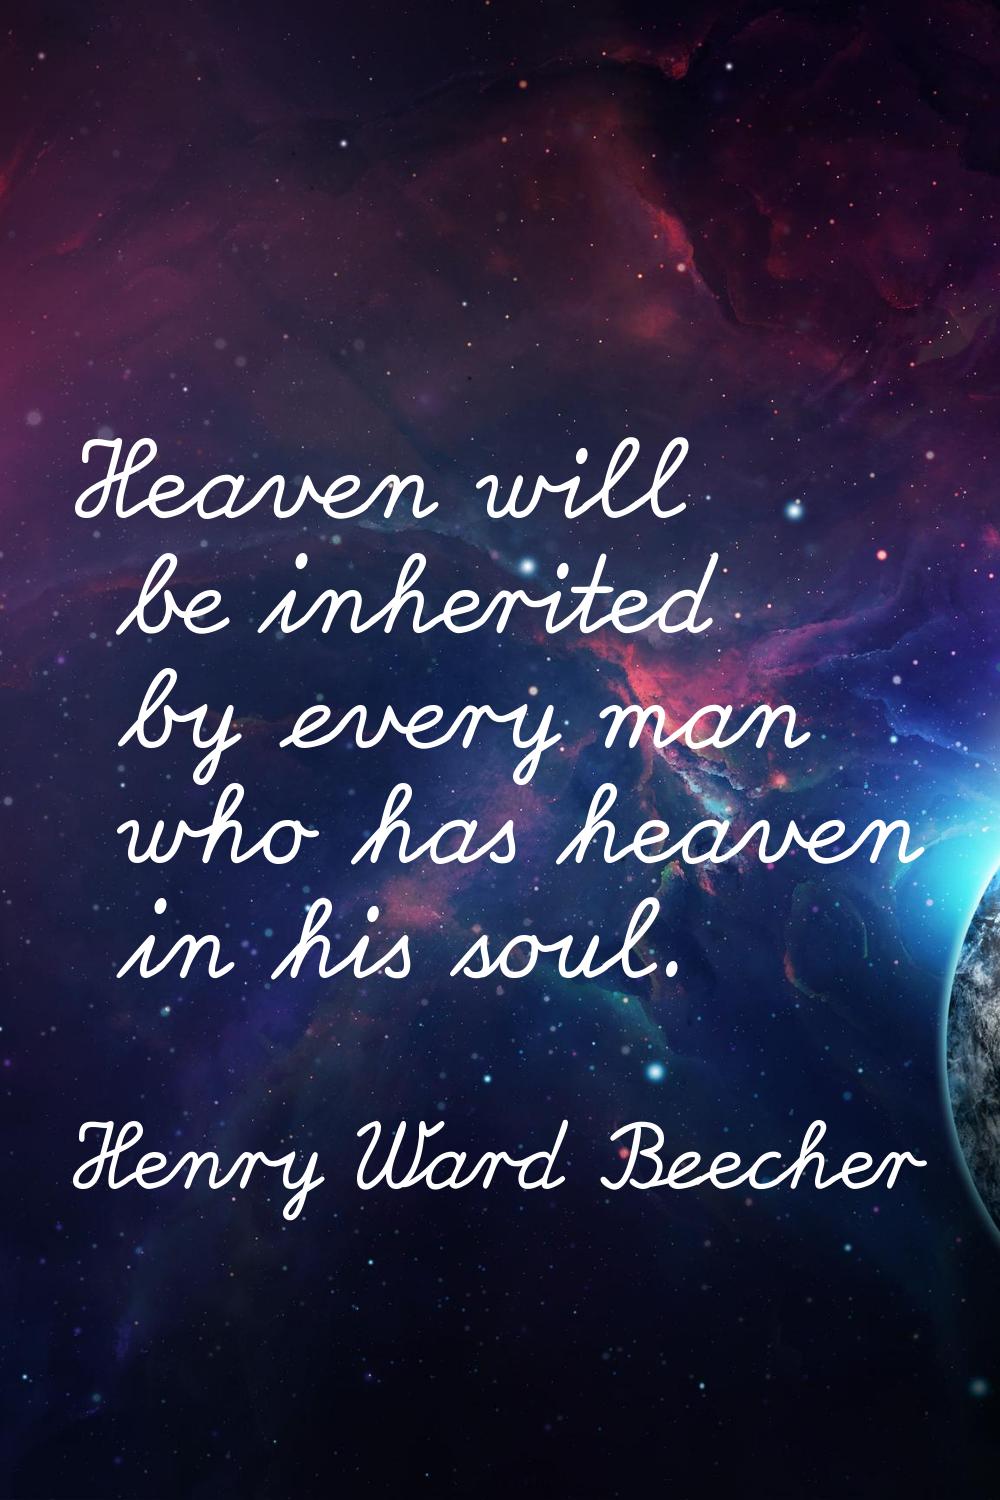 Heaven will be inherited by every man who has heaven in his soul.